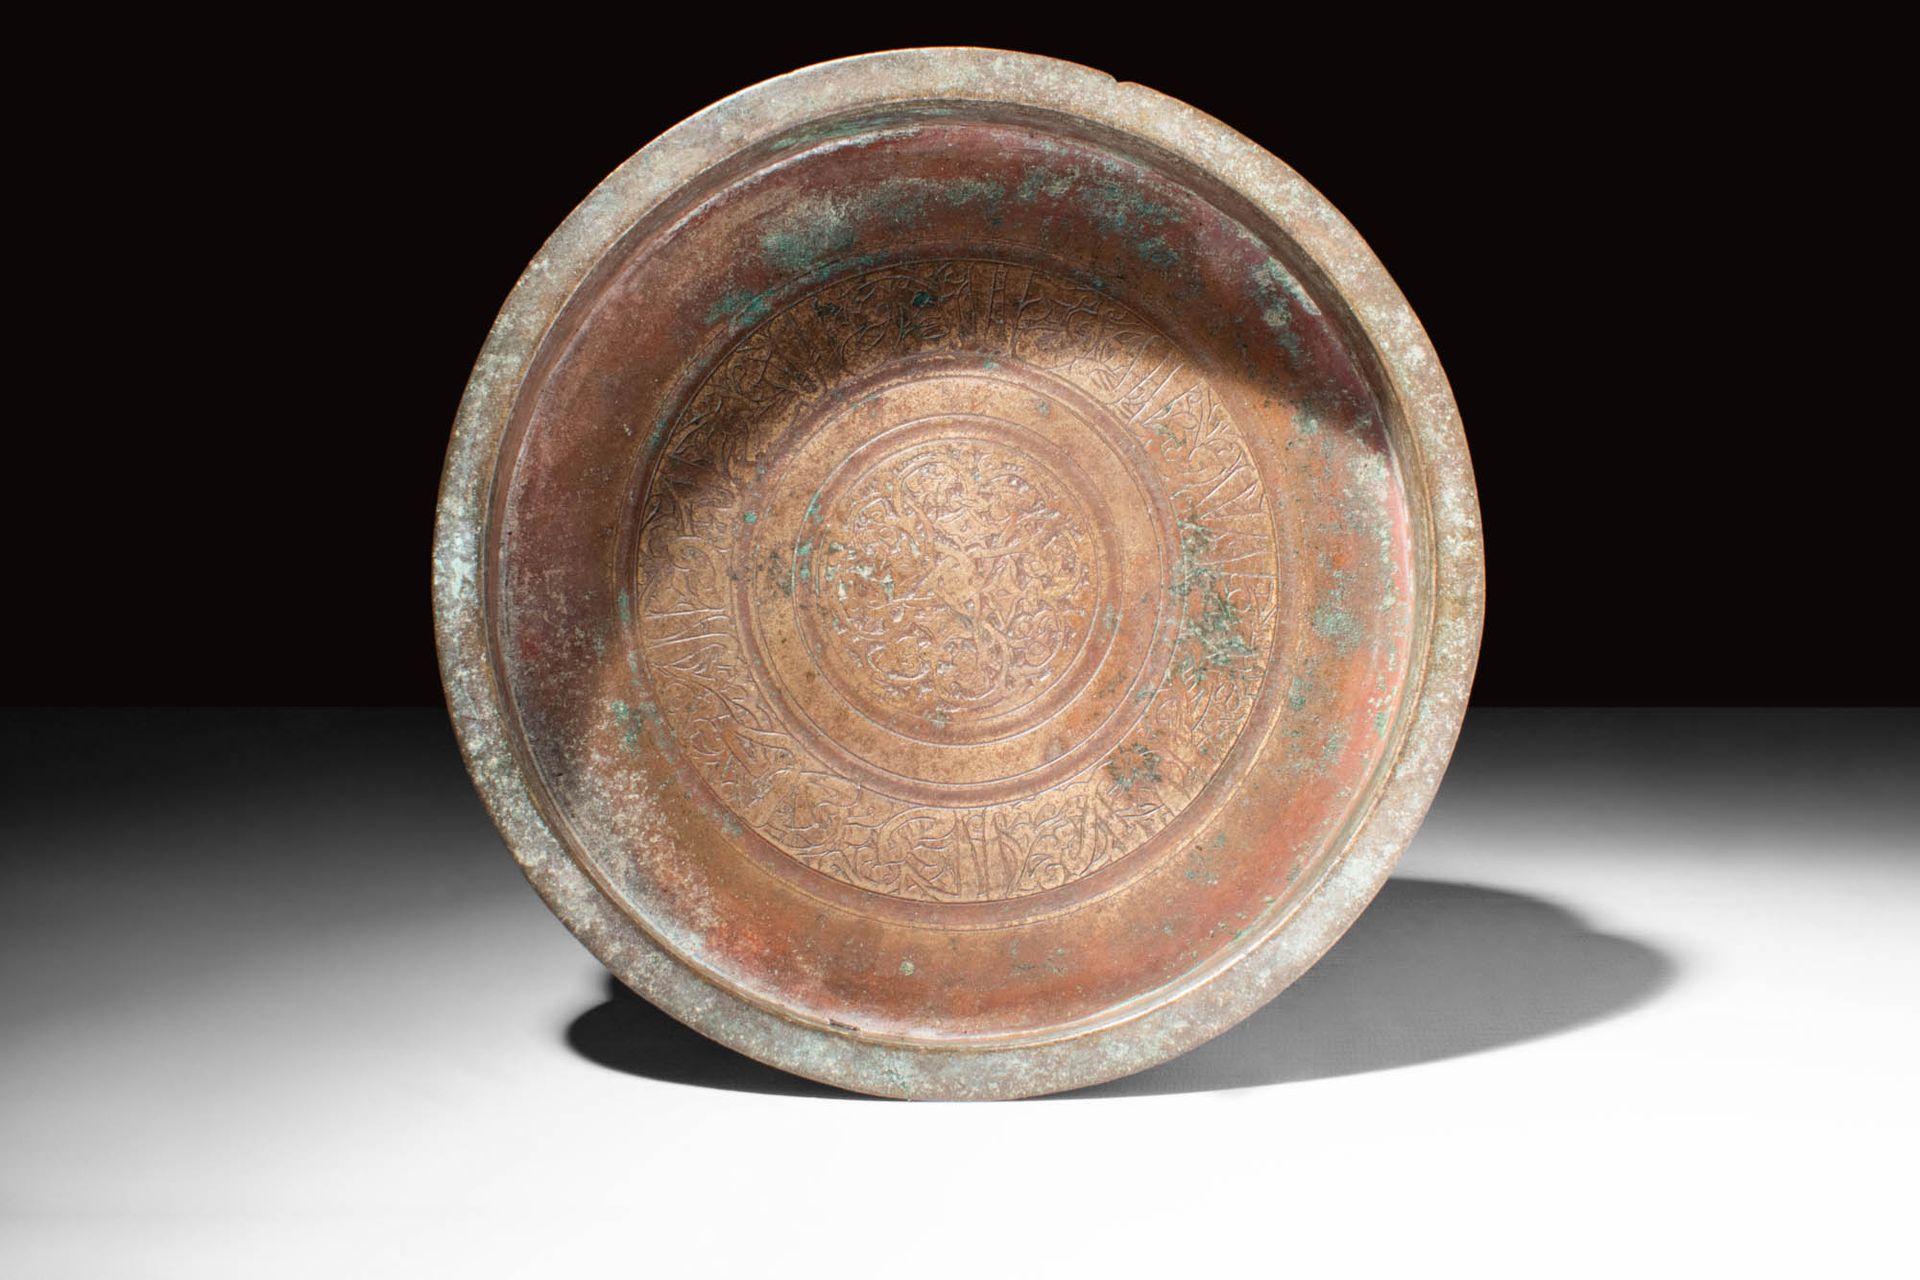 MEDIEVAL SELJUK COPPER ALLOY DECORATED TRAY Ca. AD 1100 - 1300.
An Islamic coppe&hellip;